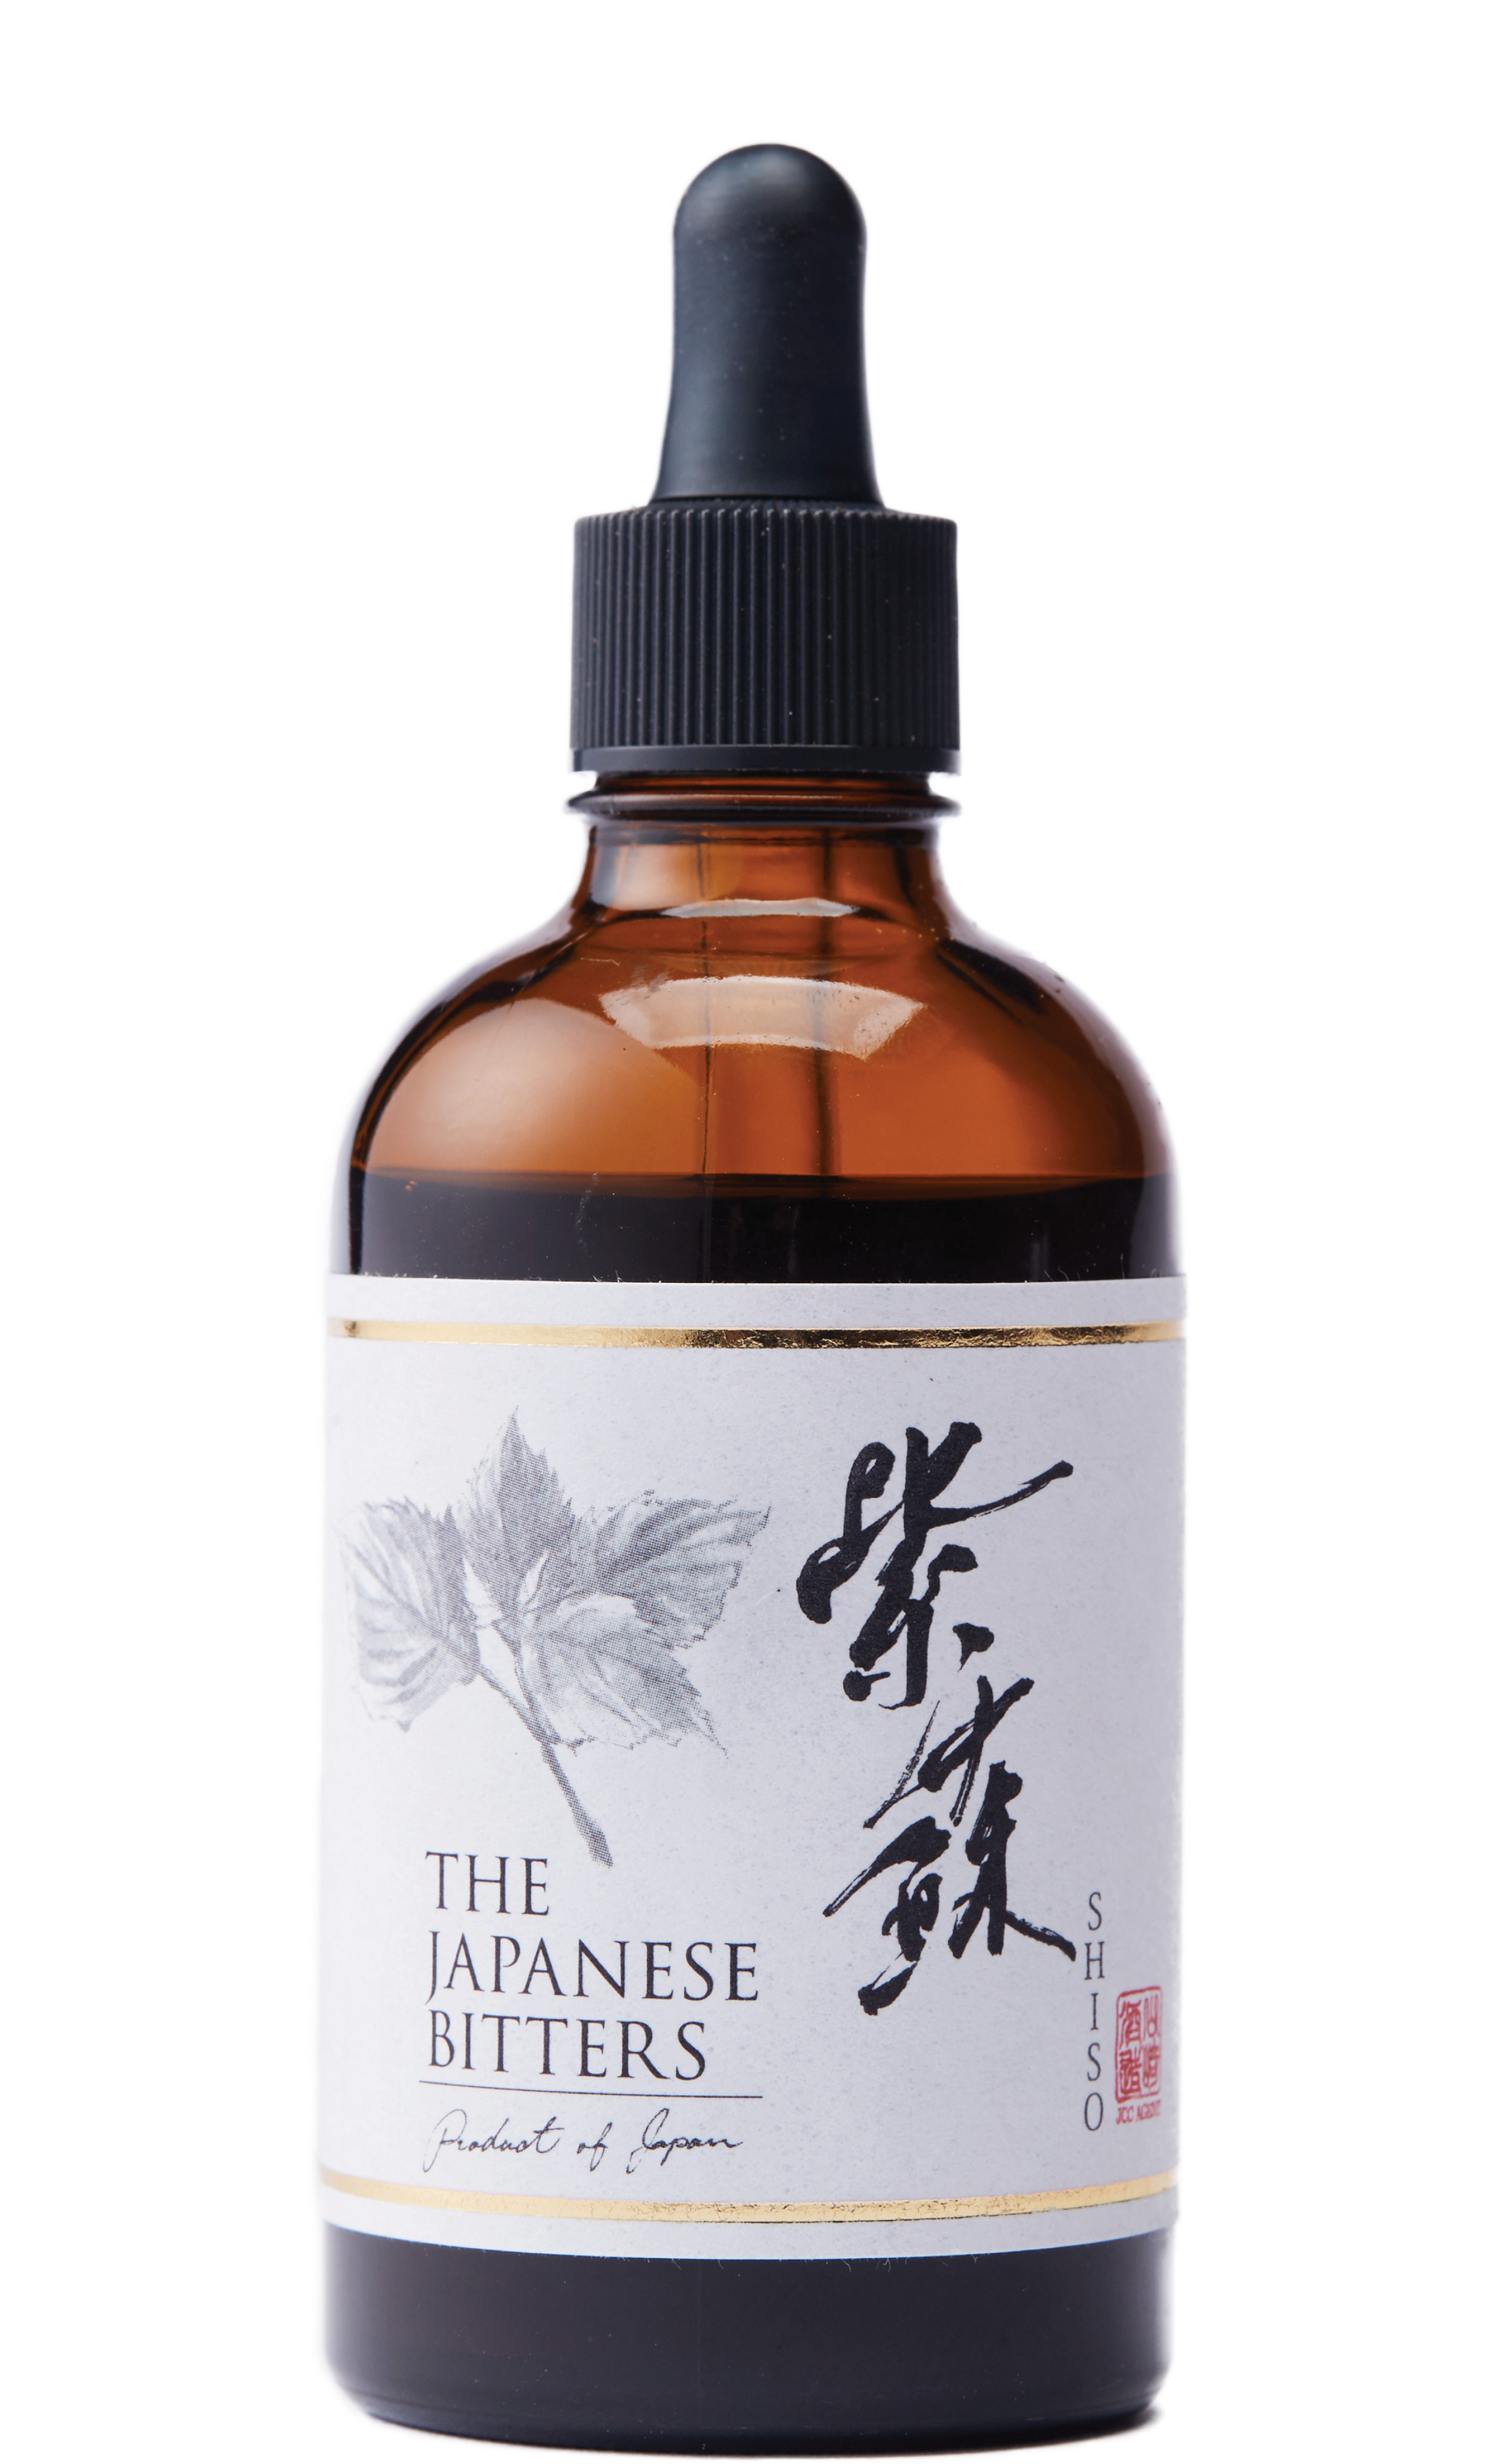 Japanese Bitter Shiso 100ml - Premium Bitters from The Japanese Bitters - Shop now at Whiskery